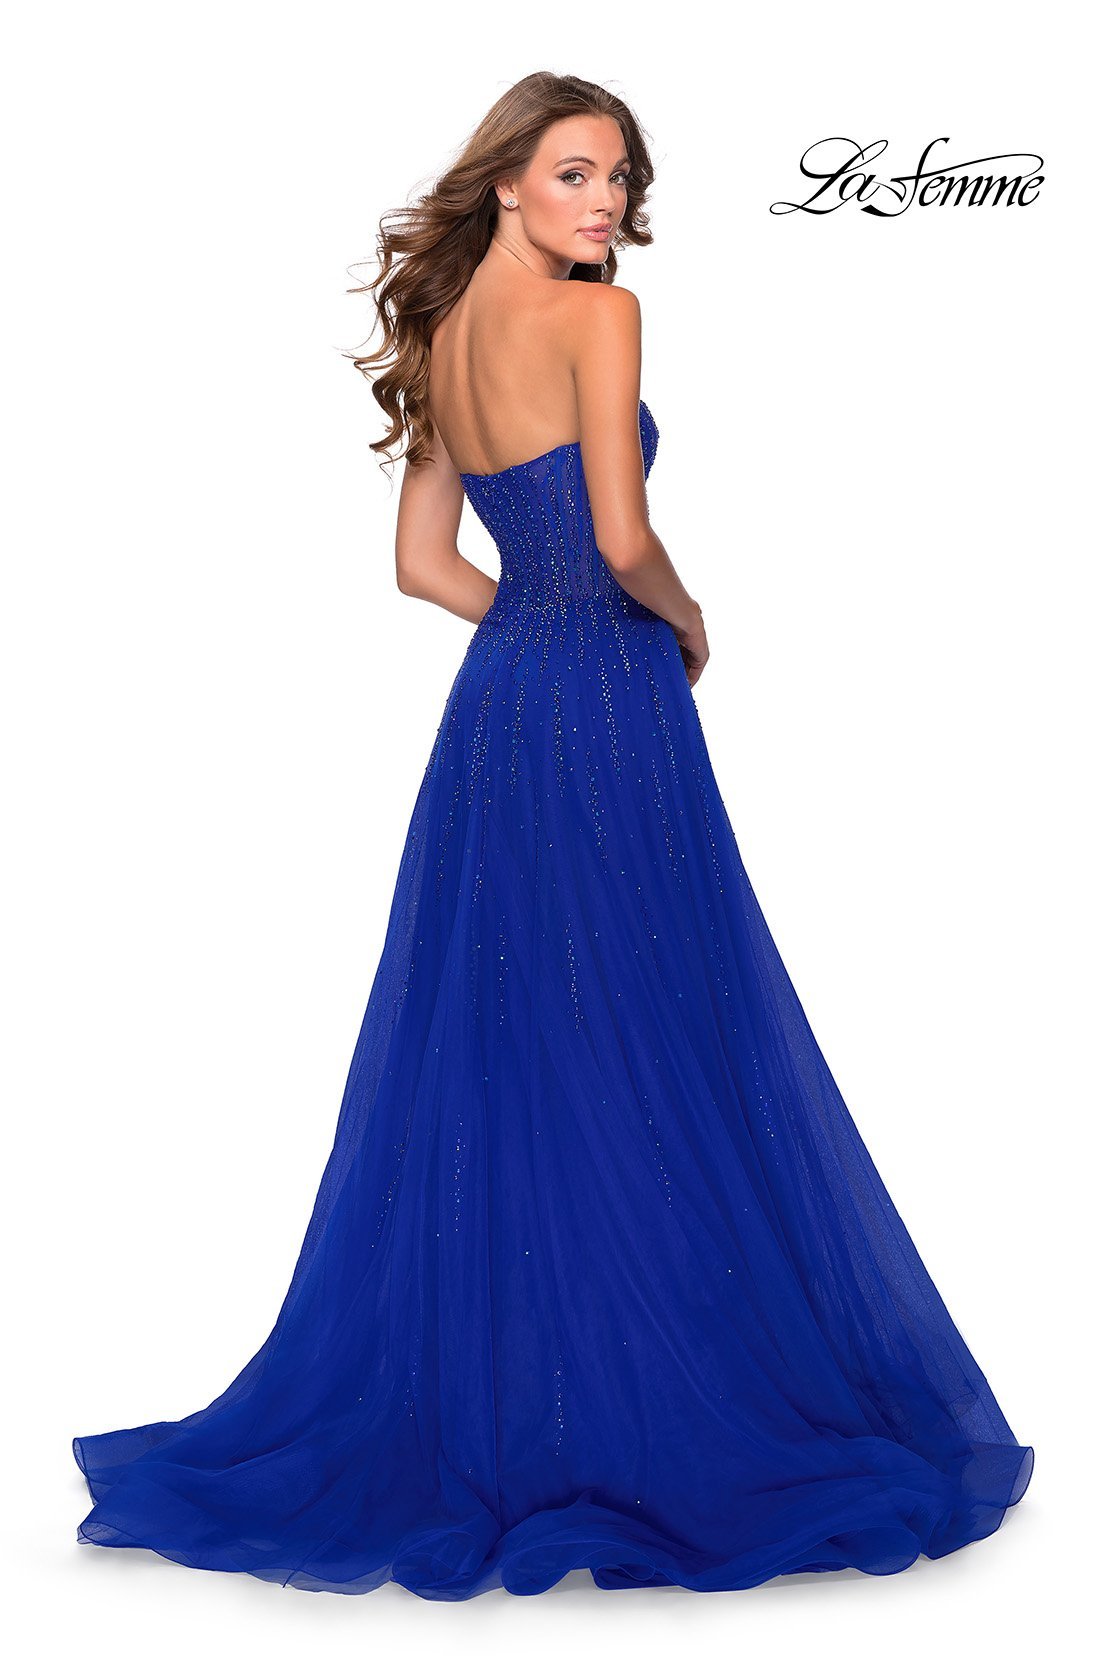 La Femme 28603 dress images in these colors: Dark Berry, Dusty Lilac, Royal Blue.